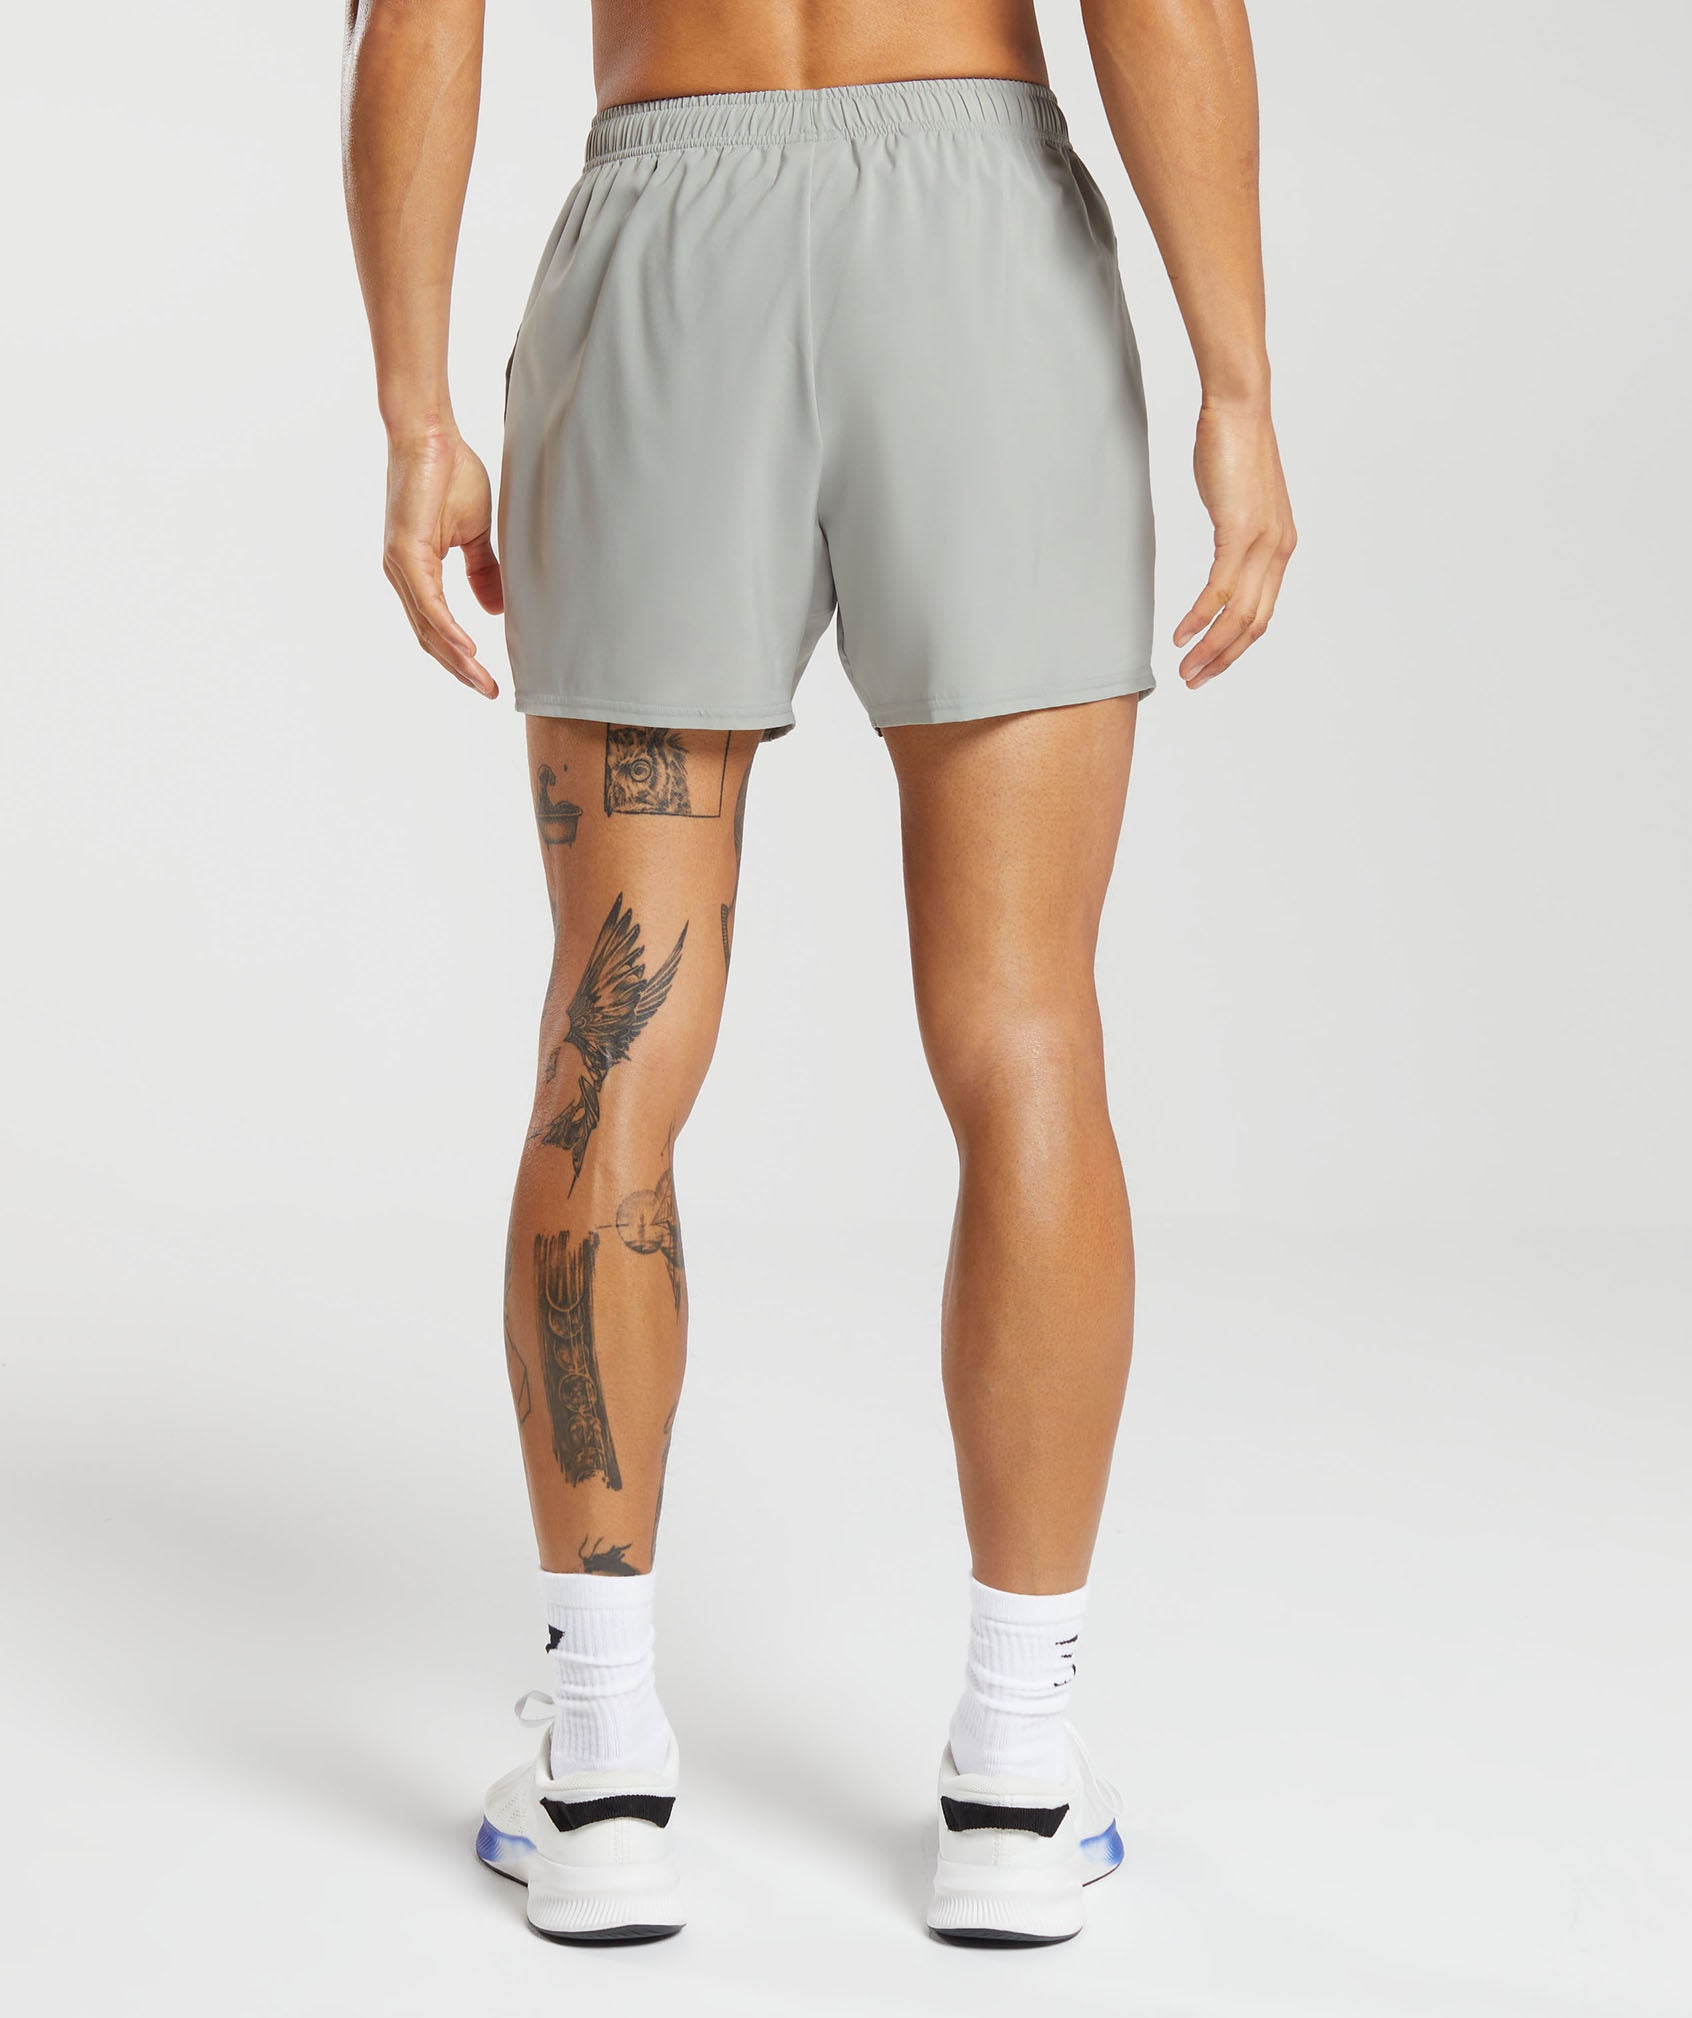 Arrival 5" Shorts product image 2